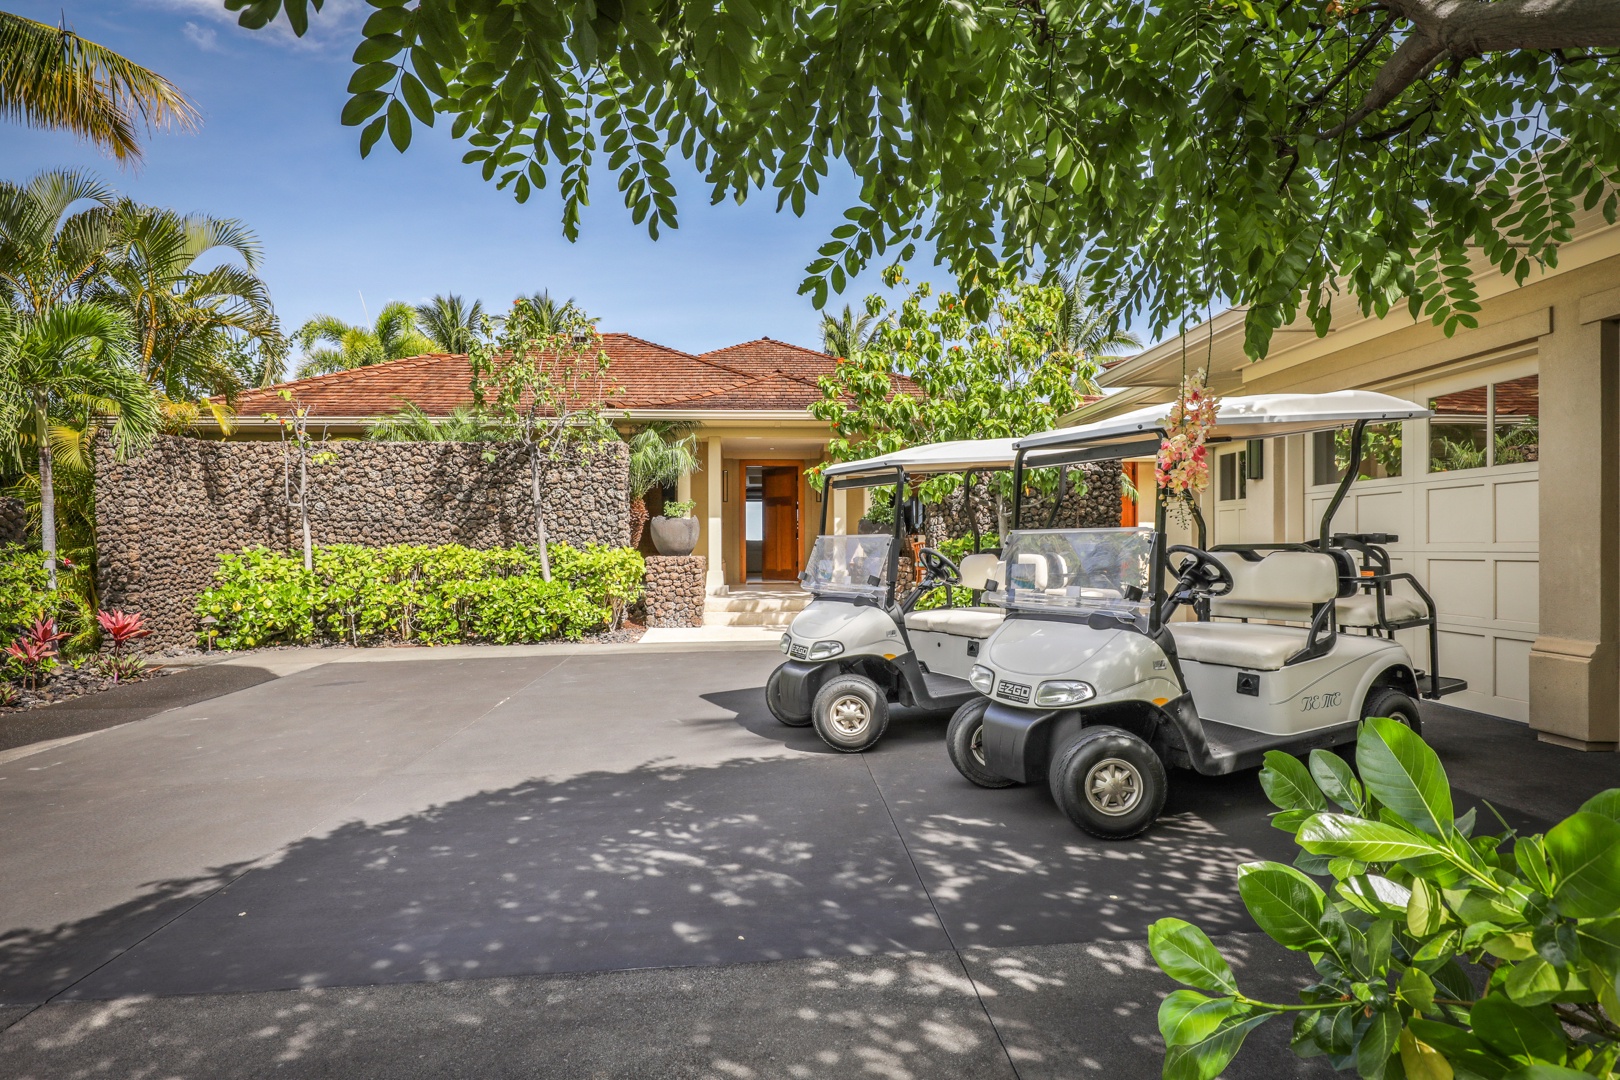 Kailua Kona Vacation Rentals, 4BD Hainoa Estate (122) at Four Seasons Resort at Hualalai - Use of two 4-Seater golf carts is included with your rental.